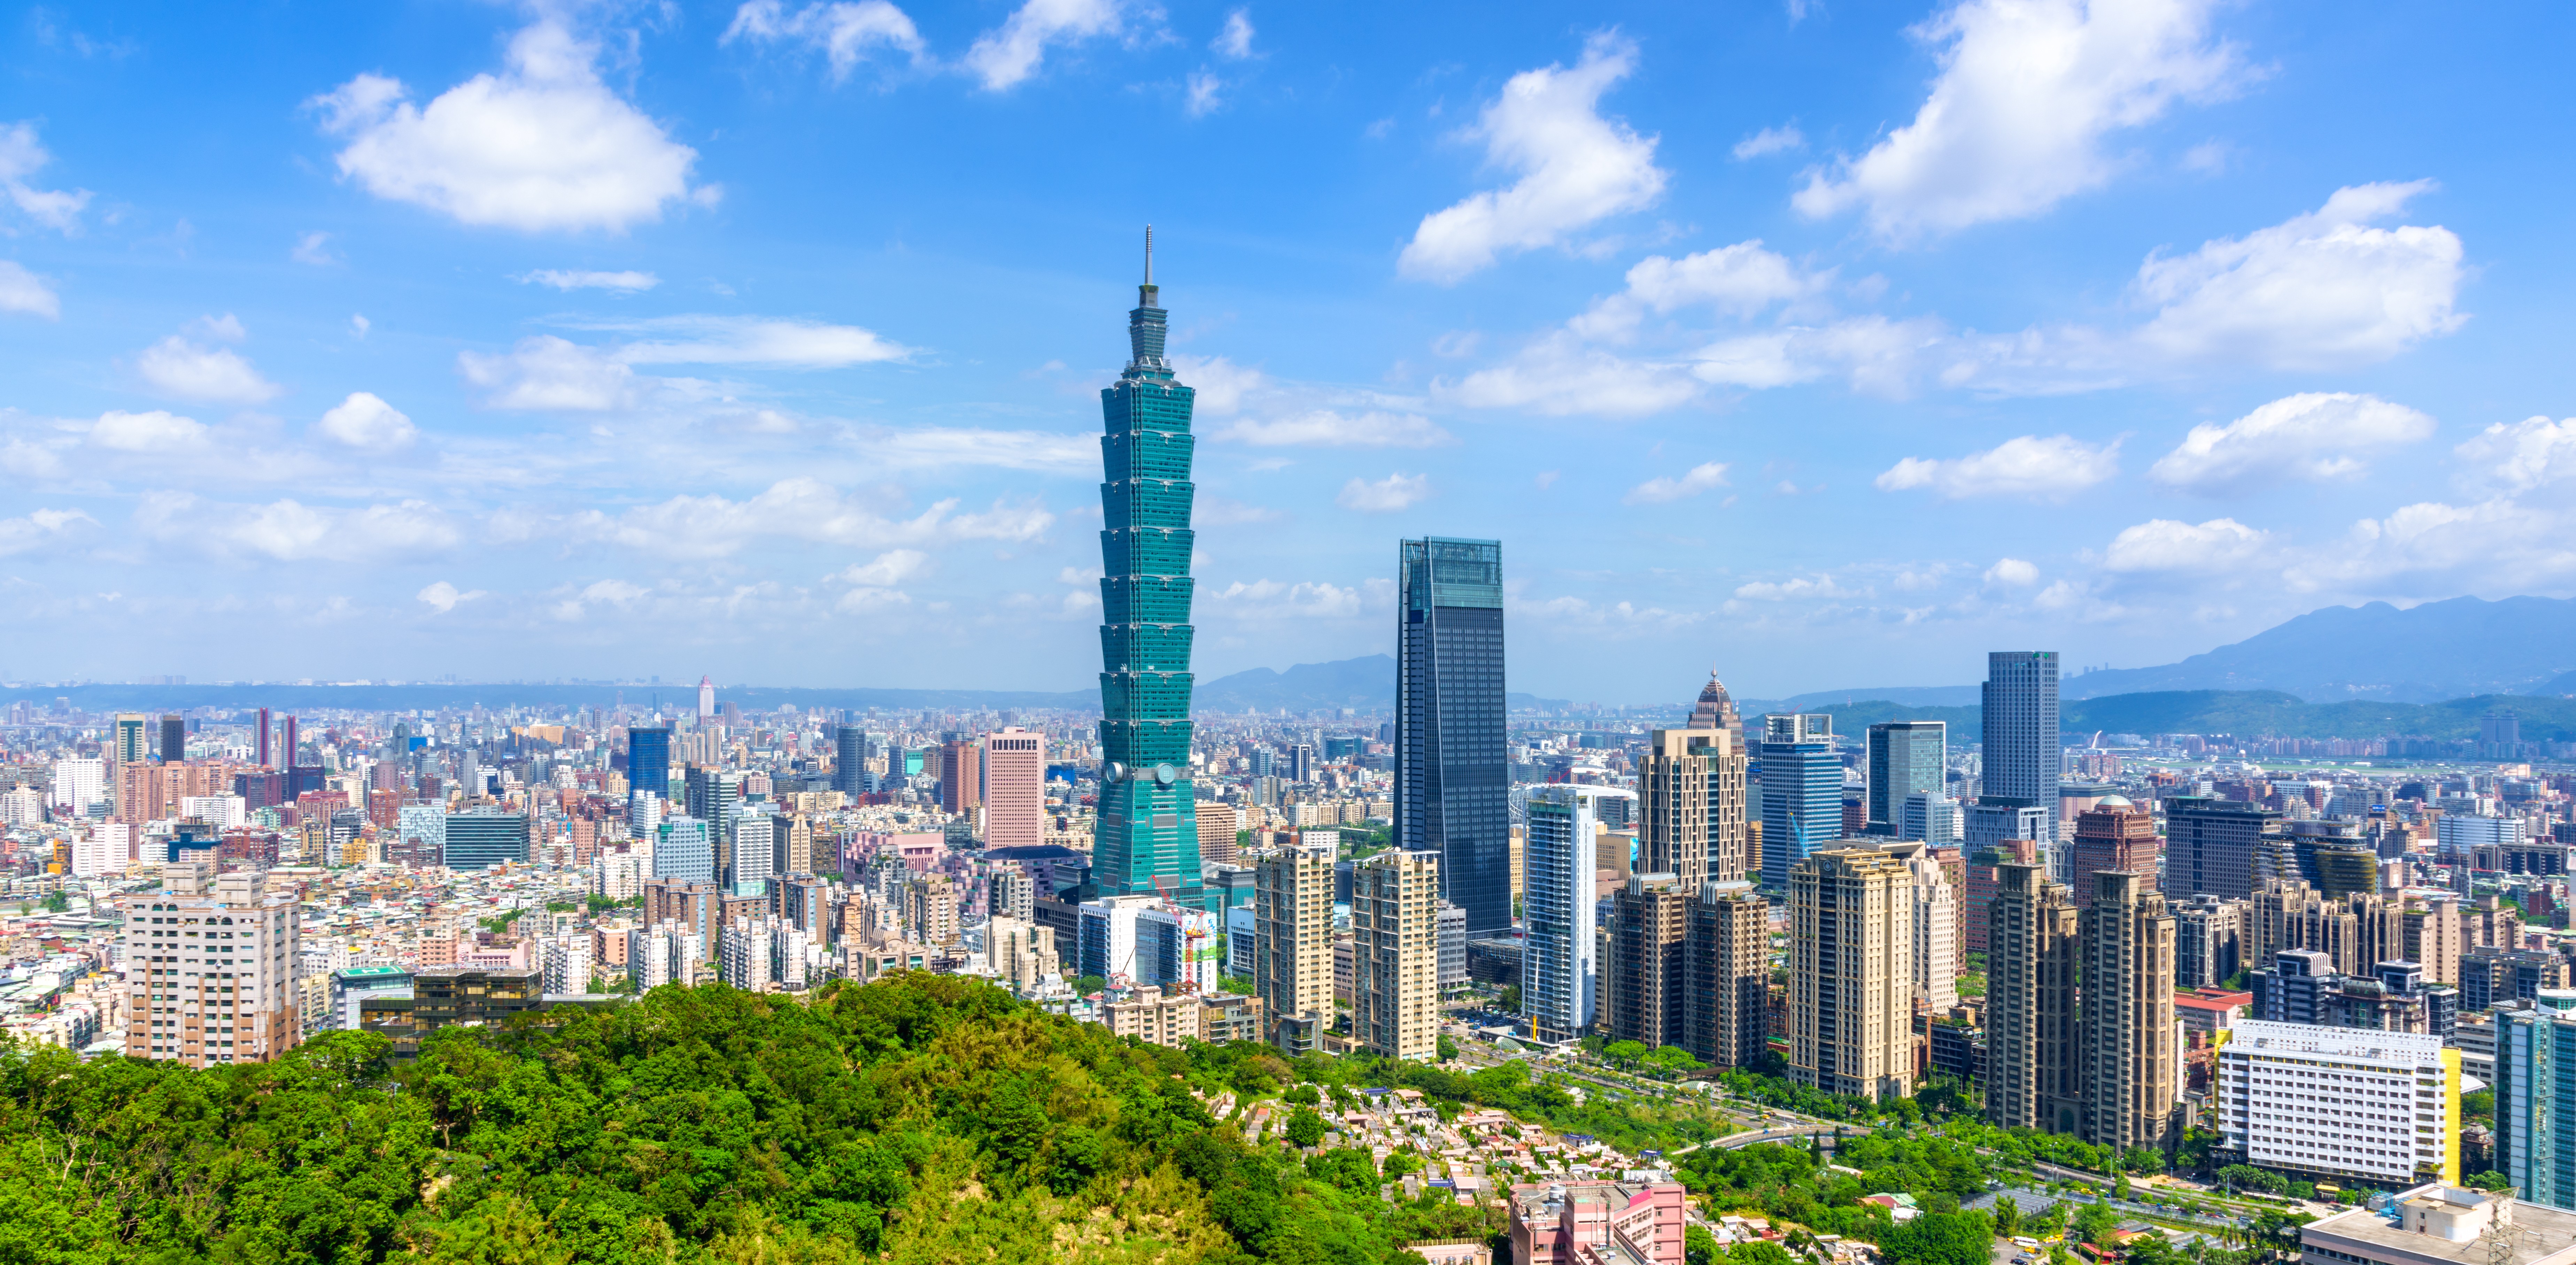 A panoramic view of Taipei, Taiwan. Beijing should learn from its experiences in Hong Kong if it wants to sell its “one country, two systems” model to the island. Photo: Shutterstock